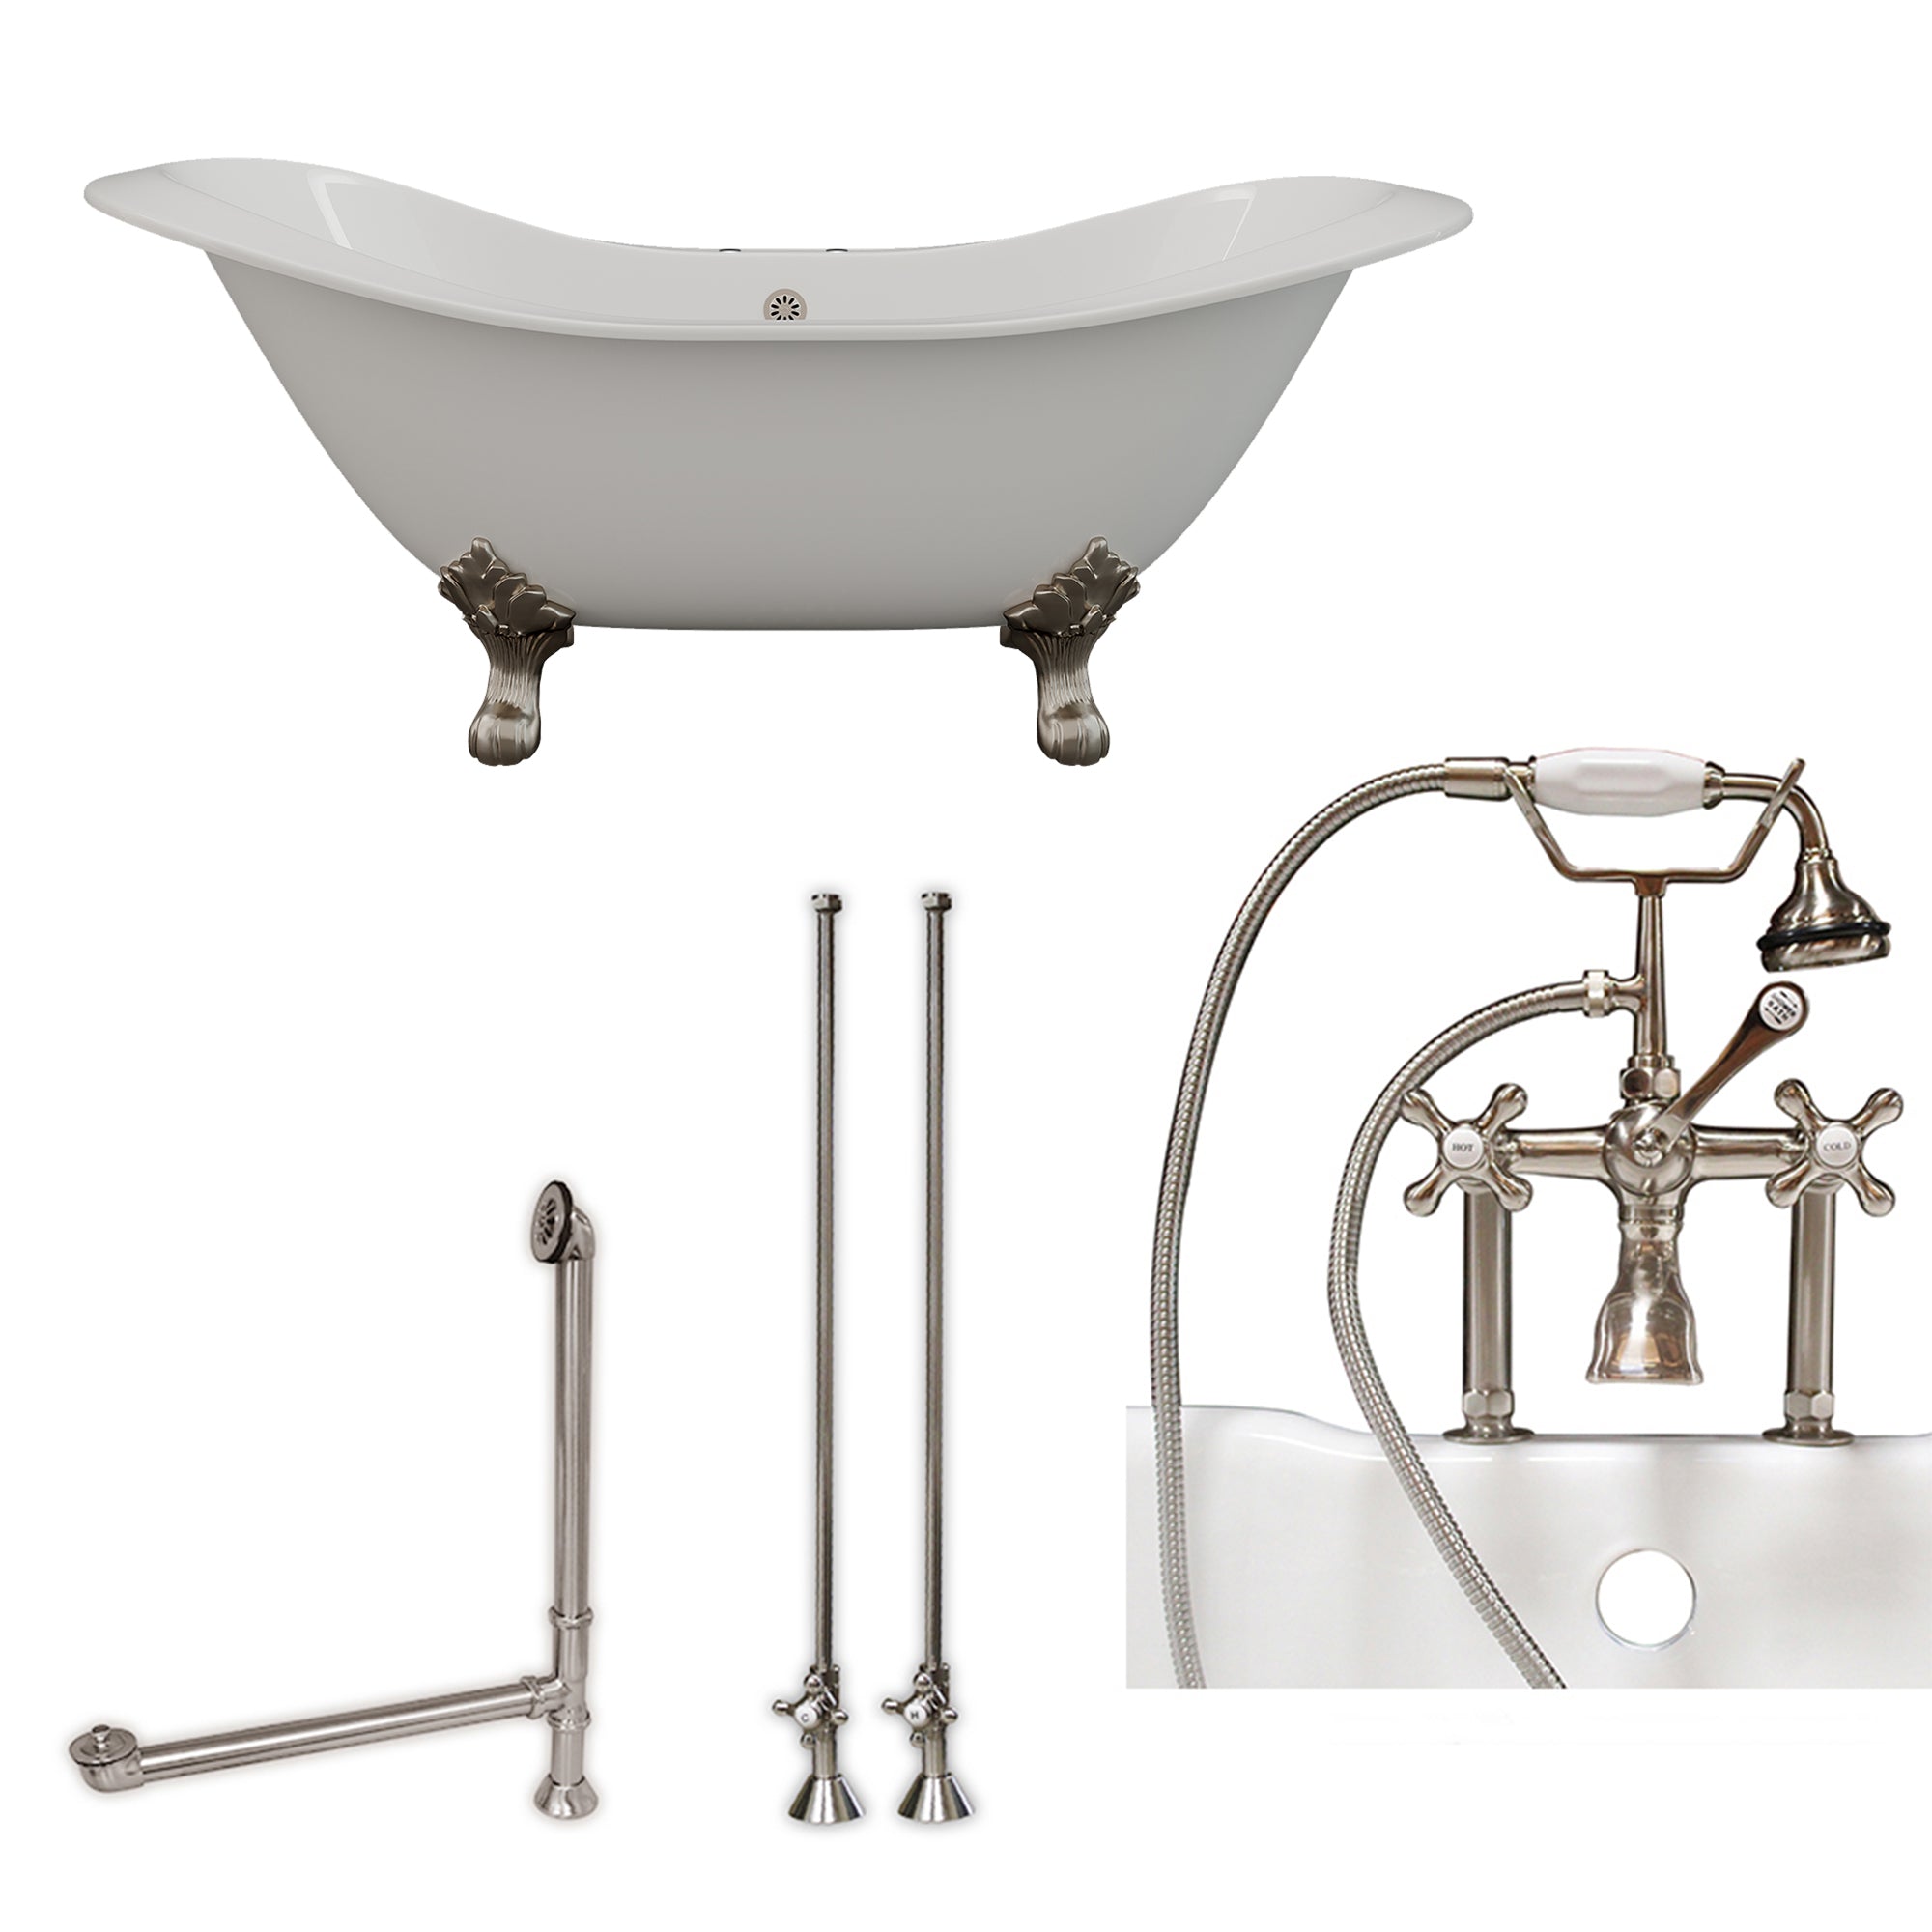 Cambridge Plumbing Double Slipper Cast Iron Soaking Tub (Porcelain interior and white paint exterior) with Lion’s Paw Feet and Deck Mount Plumbing Package (Brushed nickel) DES-463D-6-PKG-7DH - Vital Hydrotherapy